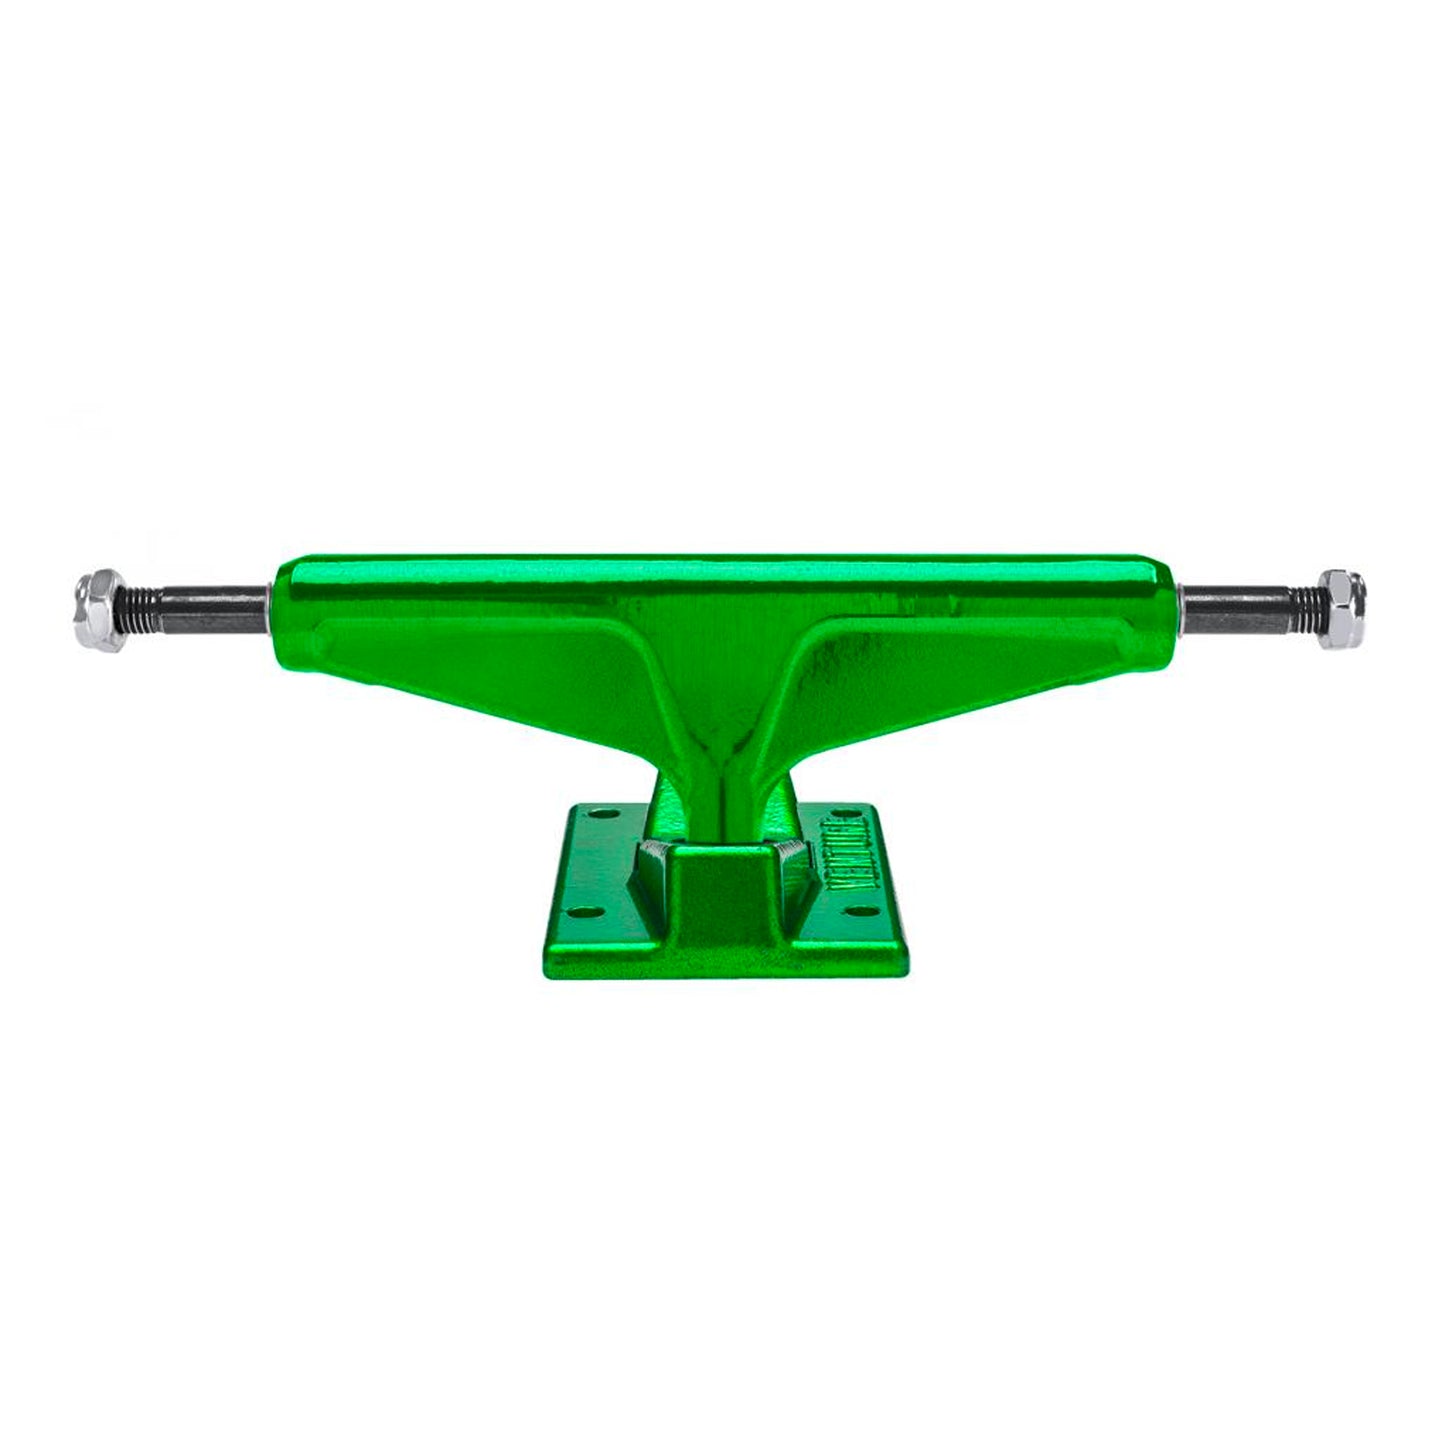 Venture - 5.2 (8") Anodised Team Edition Truck - Green (Sold as a pair) - Prime Delux Store